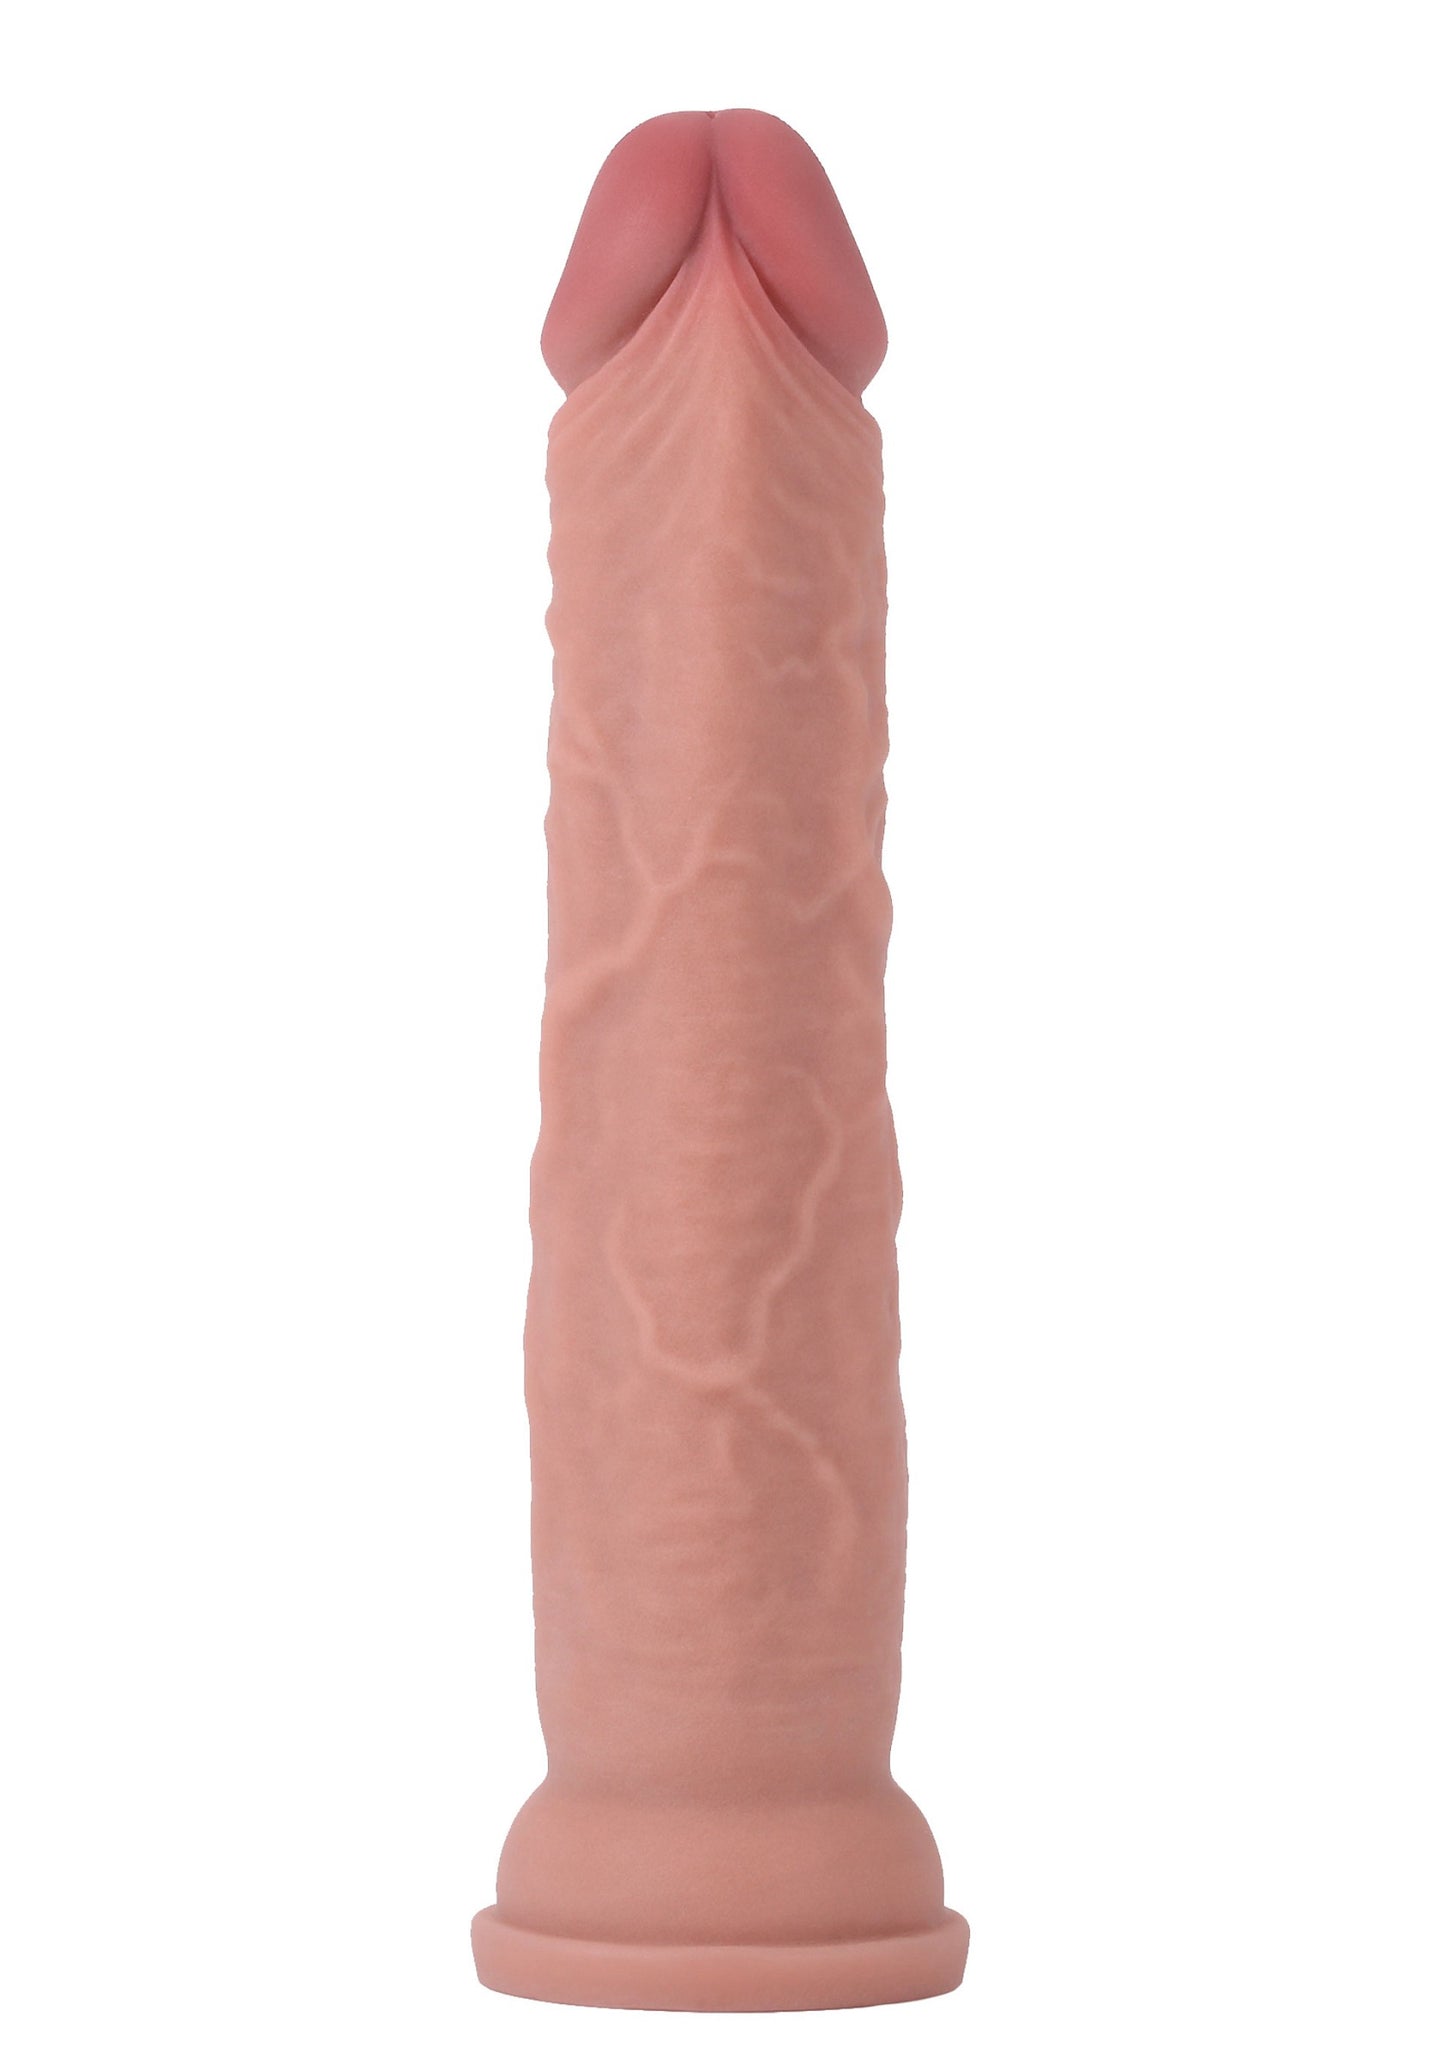 ToyJoy Get Real Deluxe Dual Density Dong 13' SKIN - 0